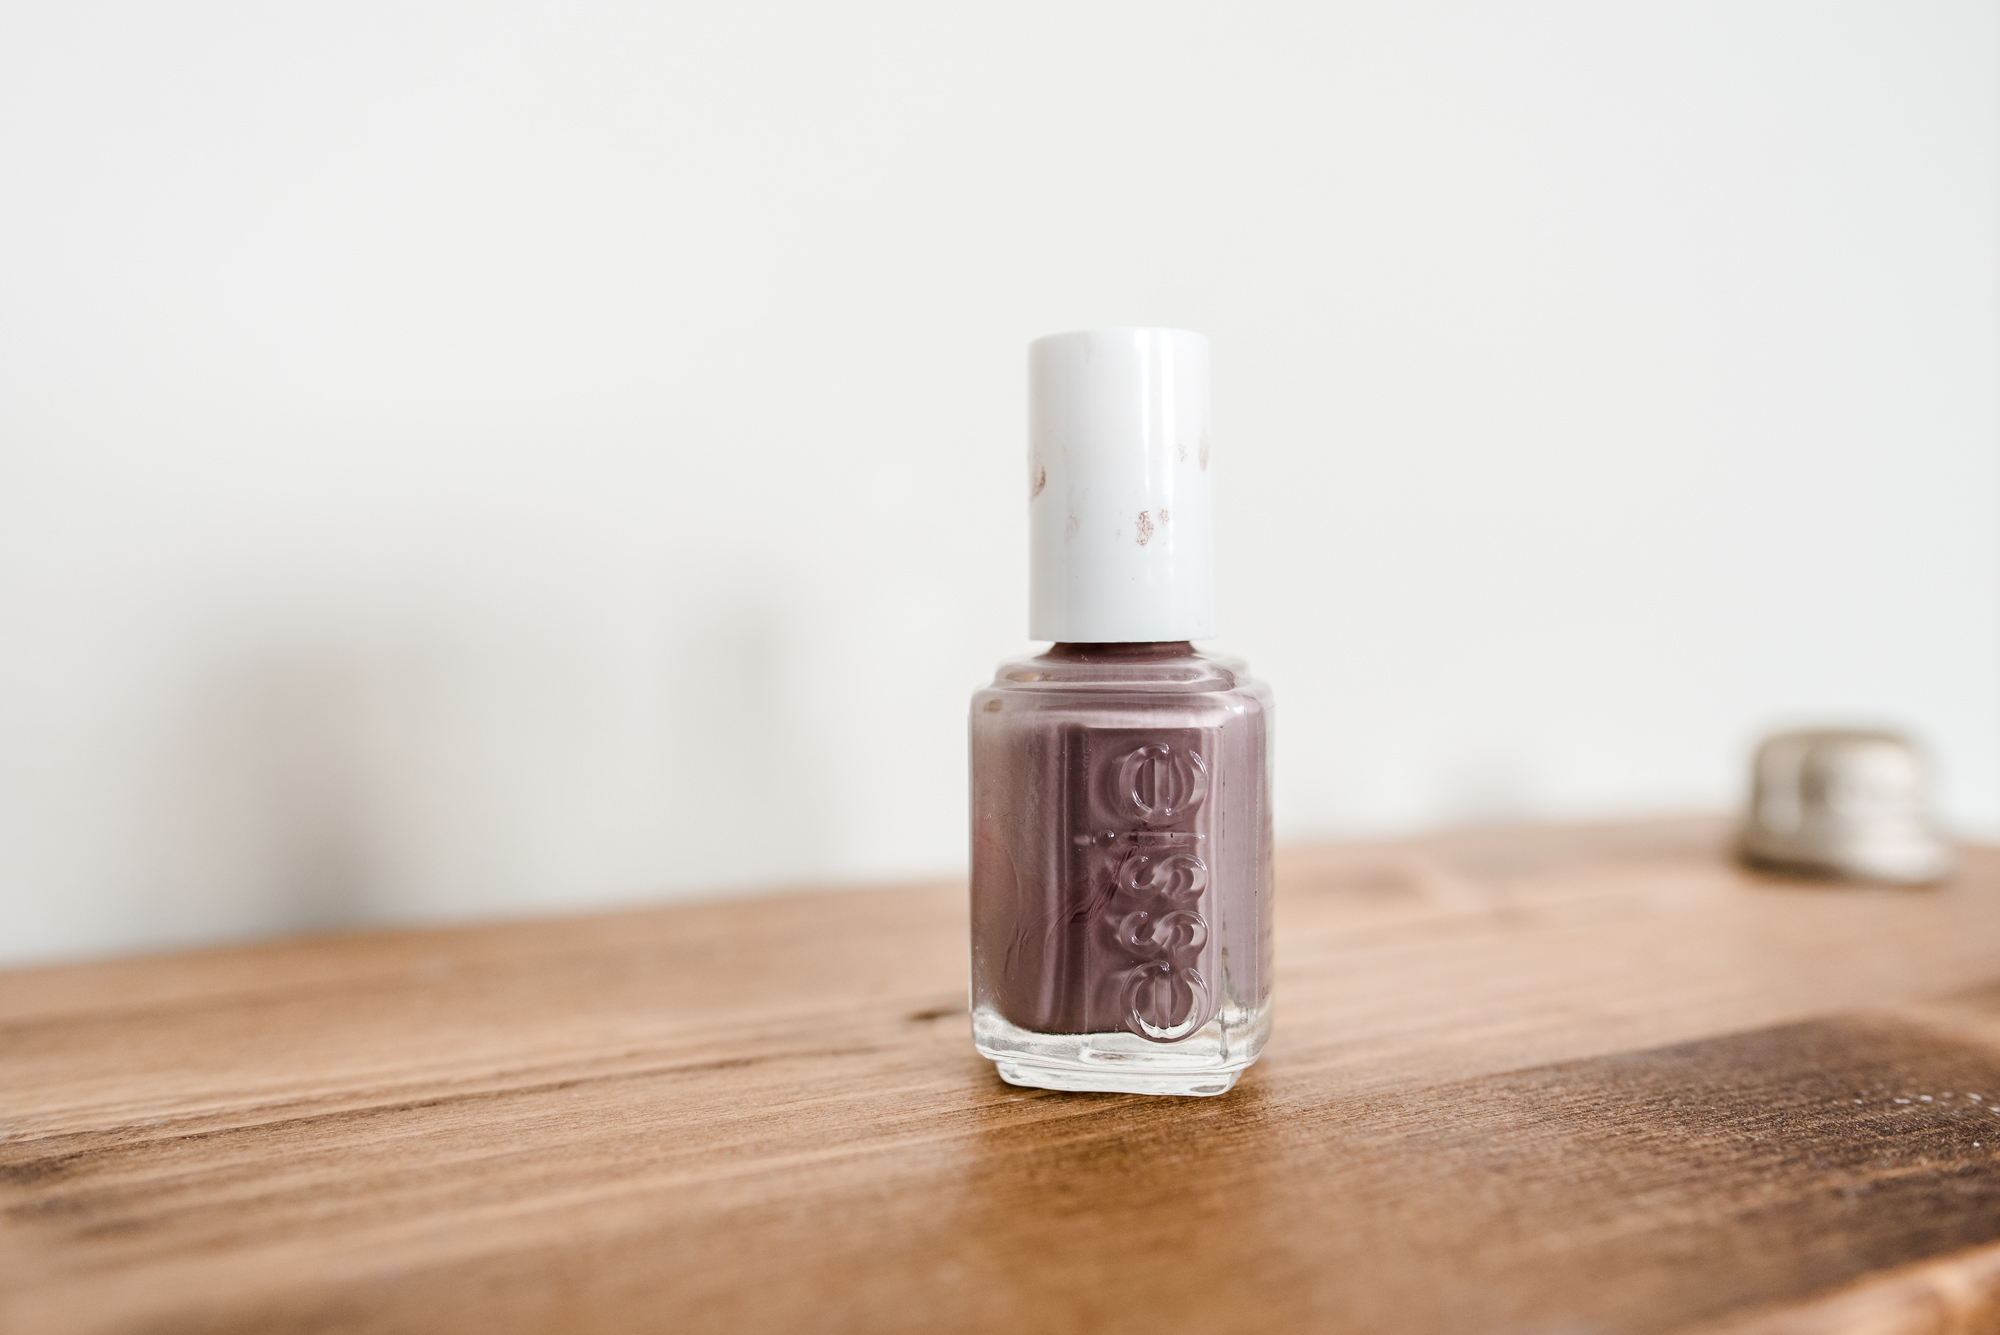 Essie's On The Mauve nail polish. Photographer's favourite things